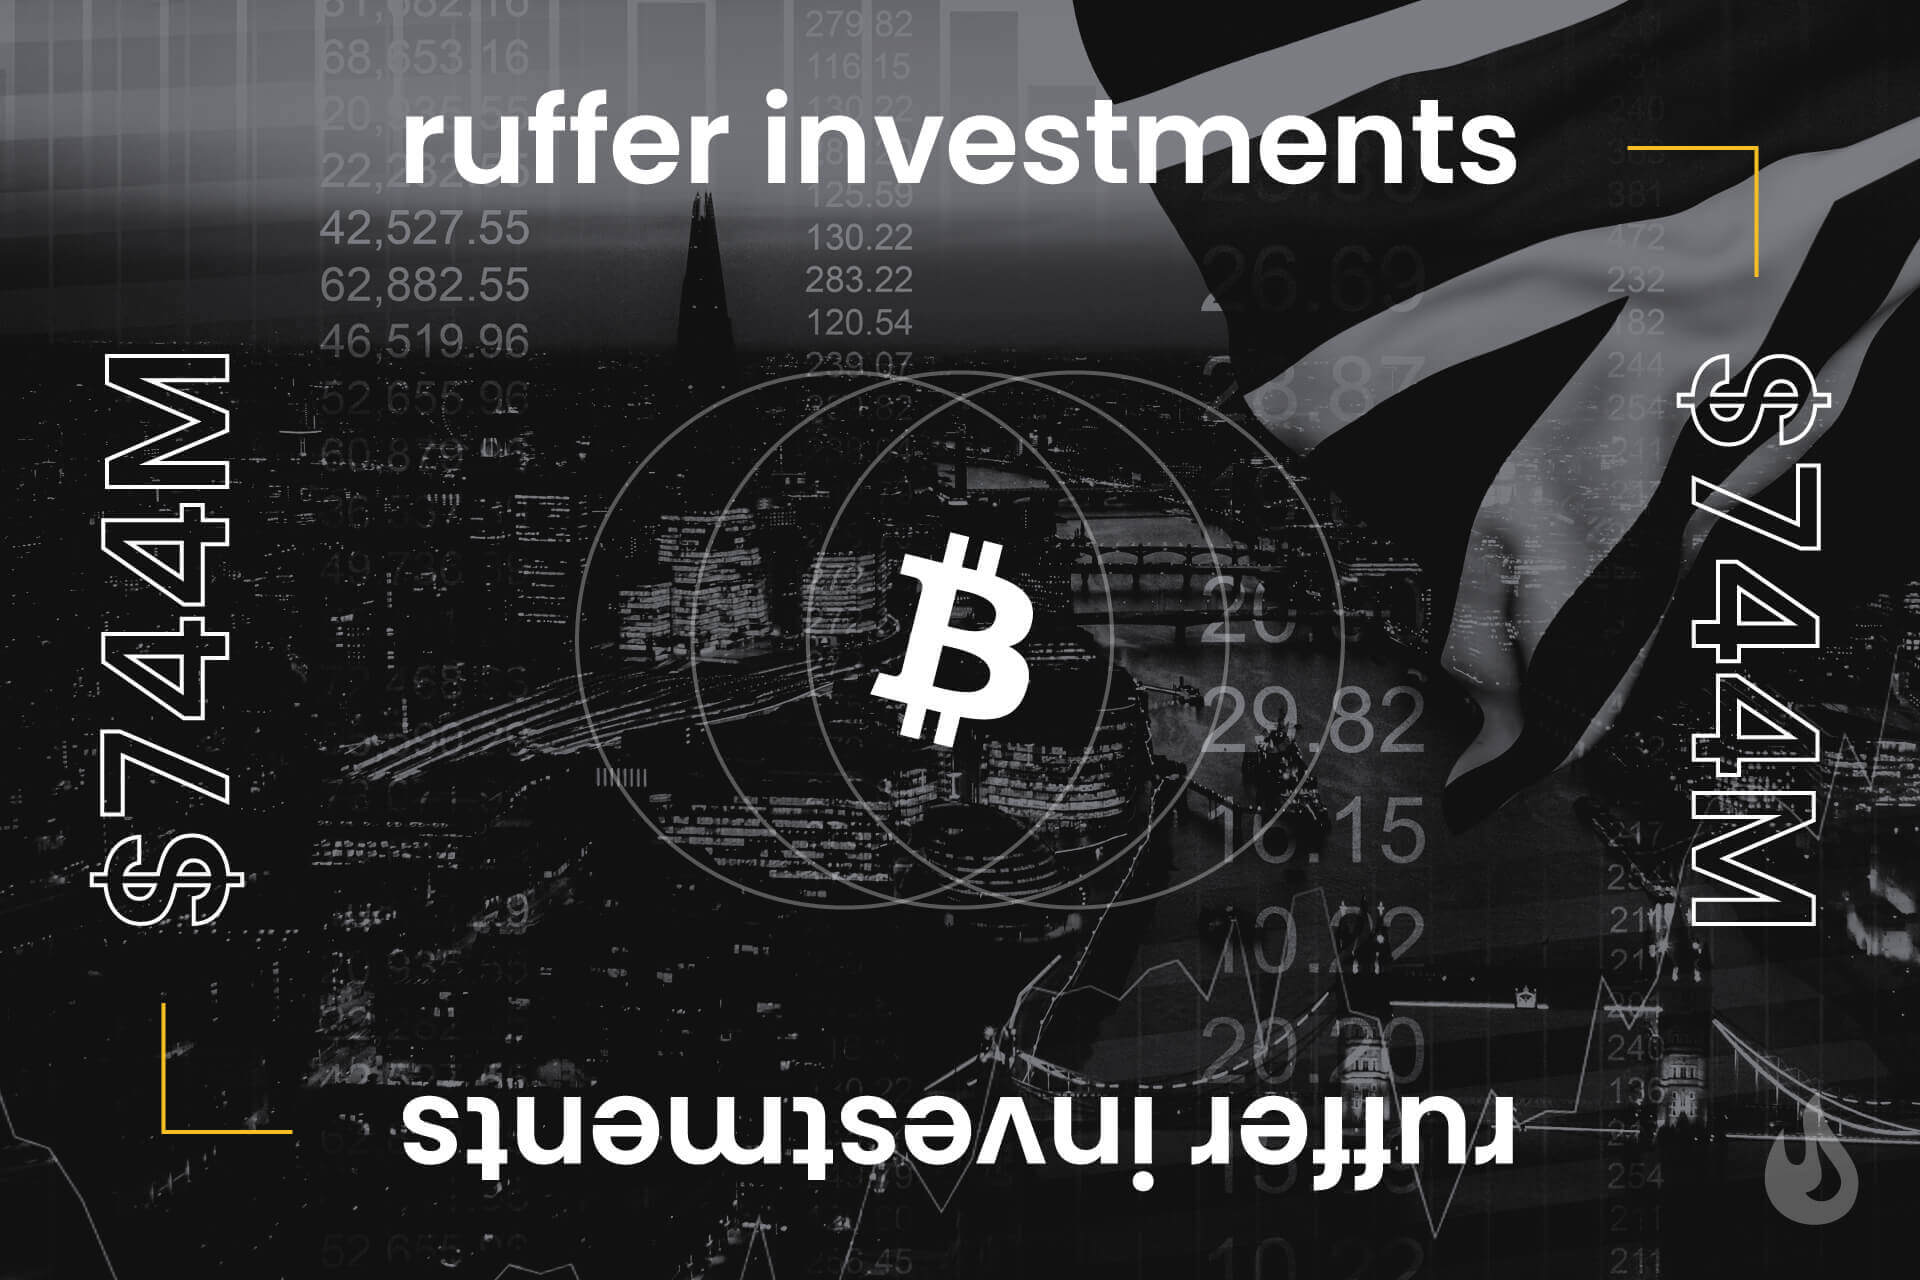 ruffer investments